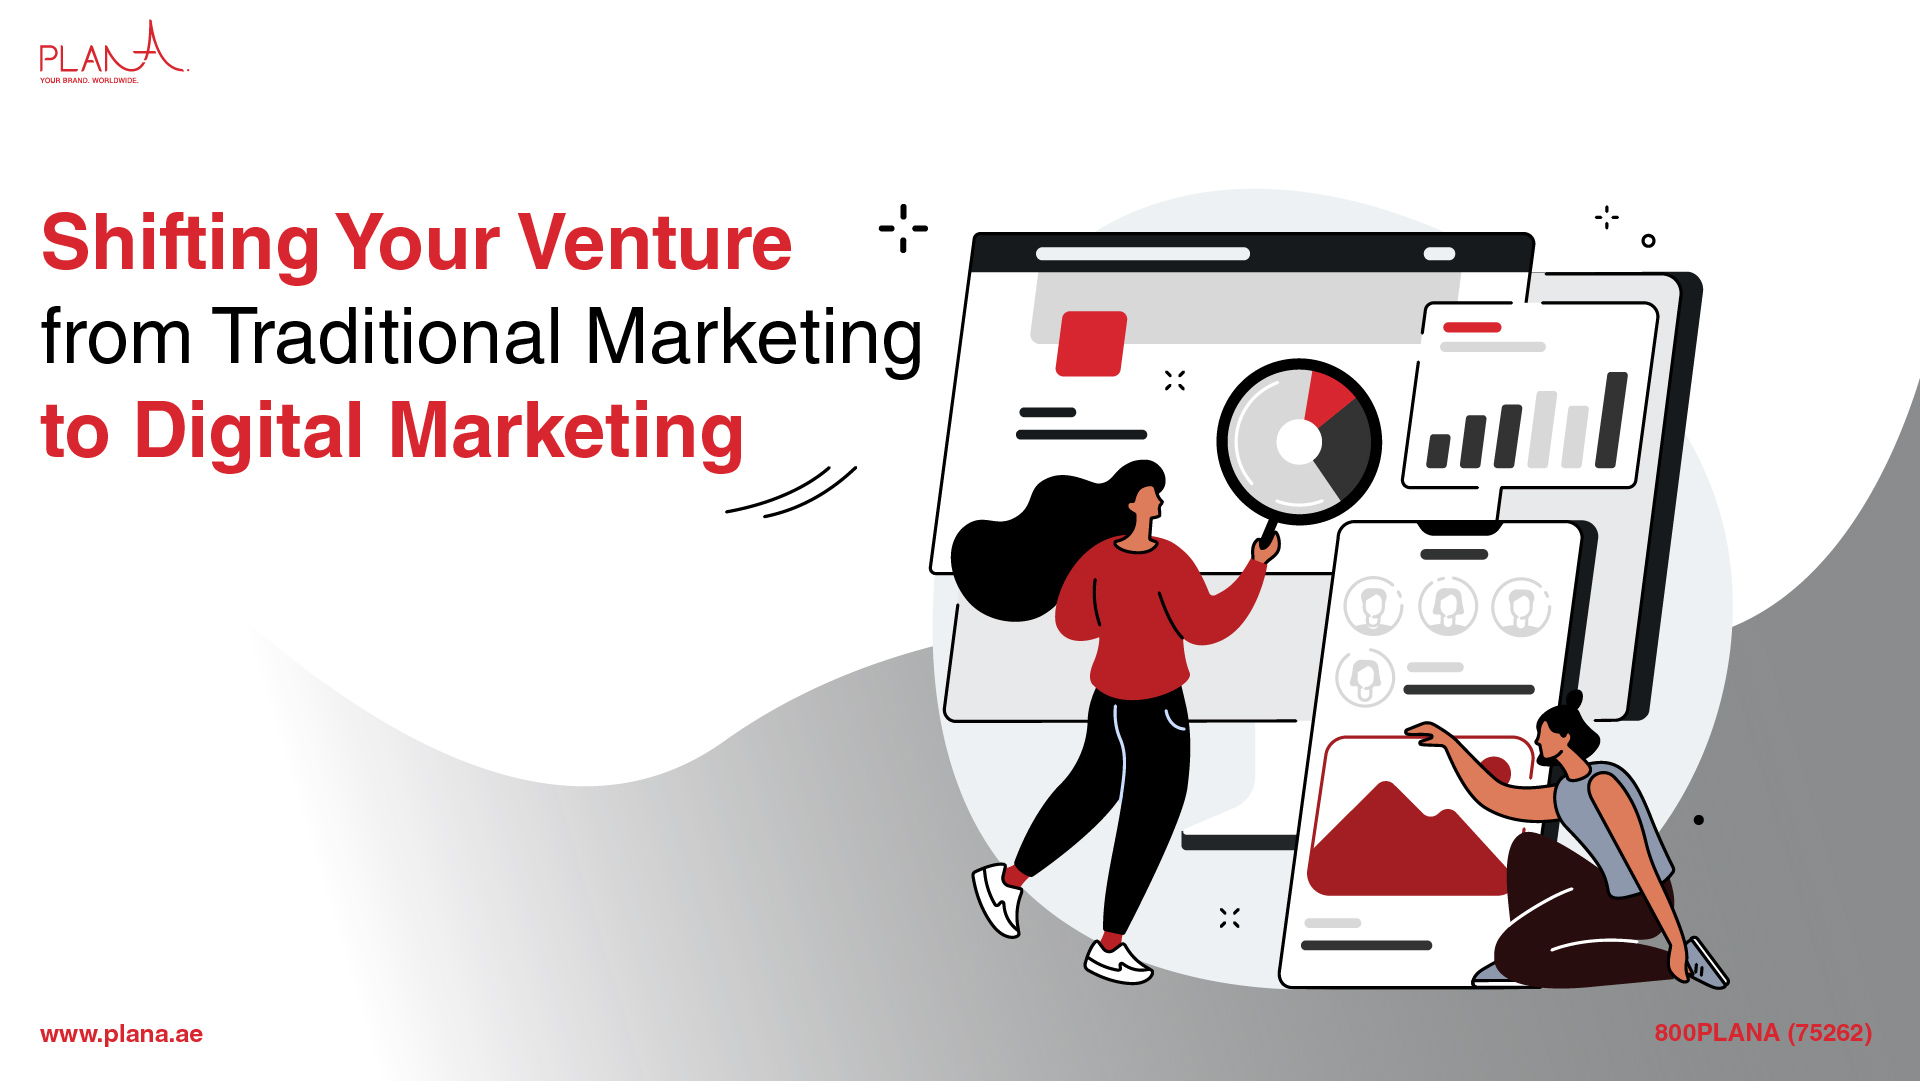 Shifting Your Venture from Traditional Marketing to Digital Marketing